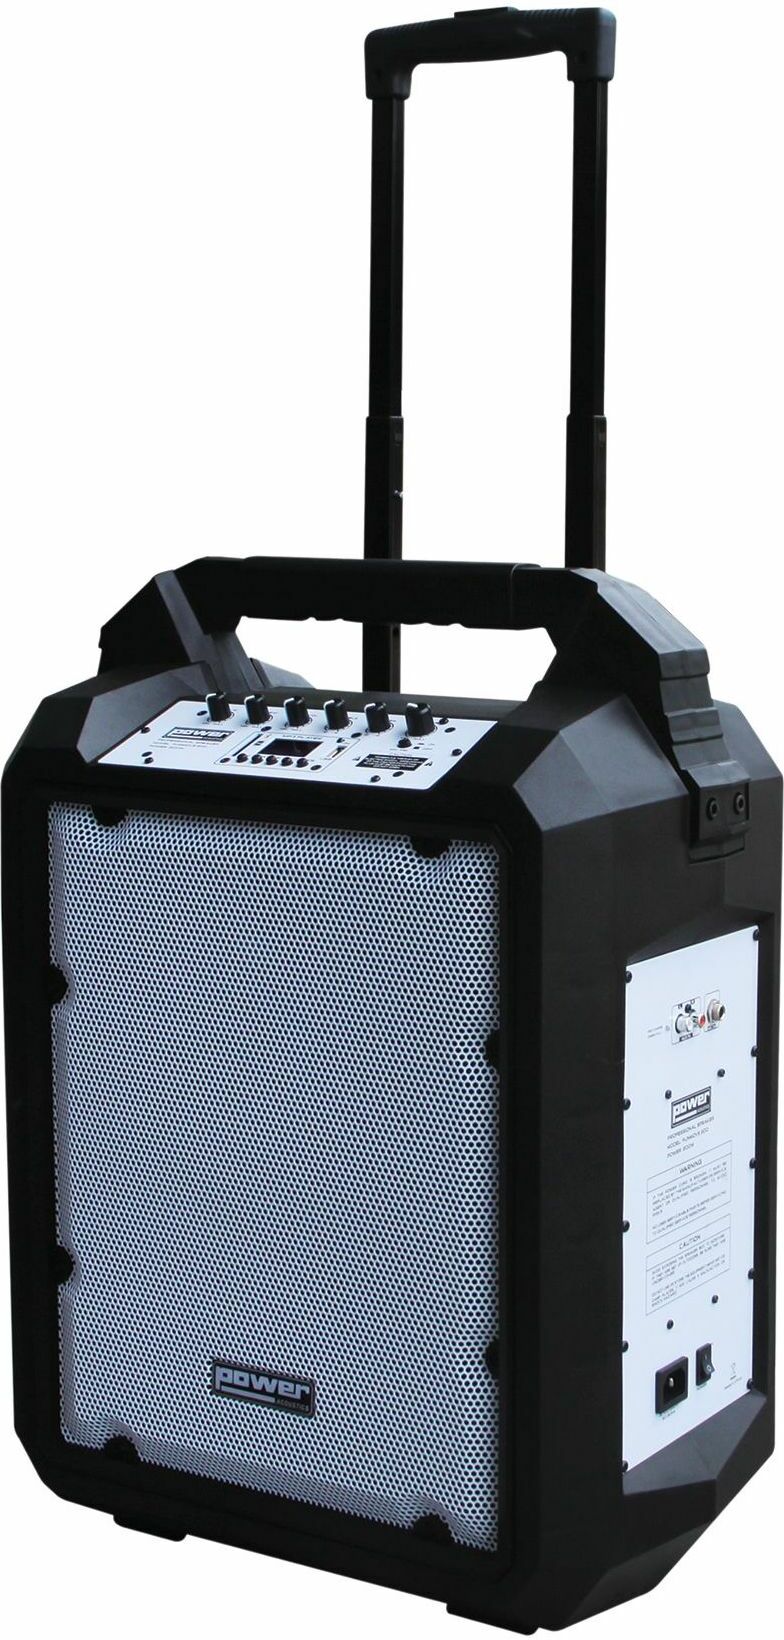 Power Acoustics Funmove200 - Portable PA system - Main picture